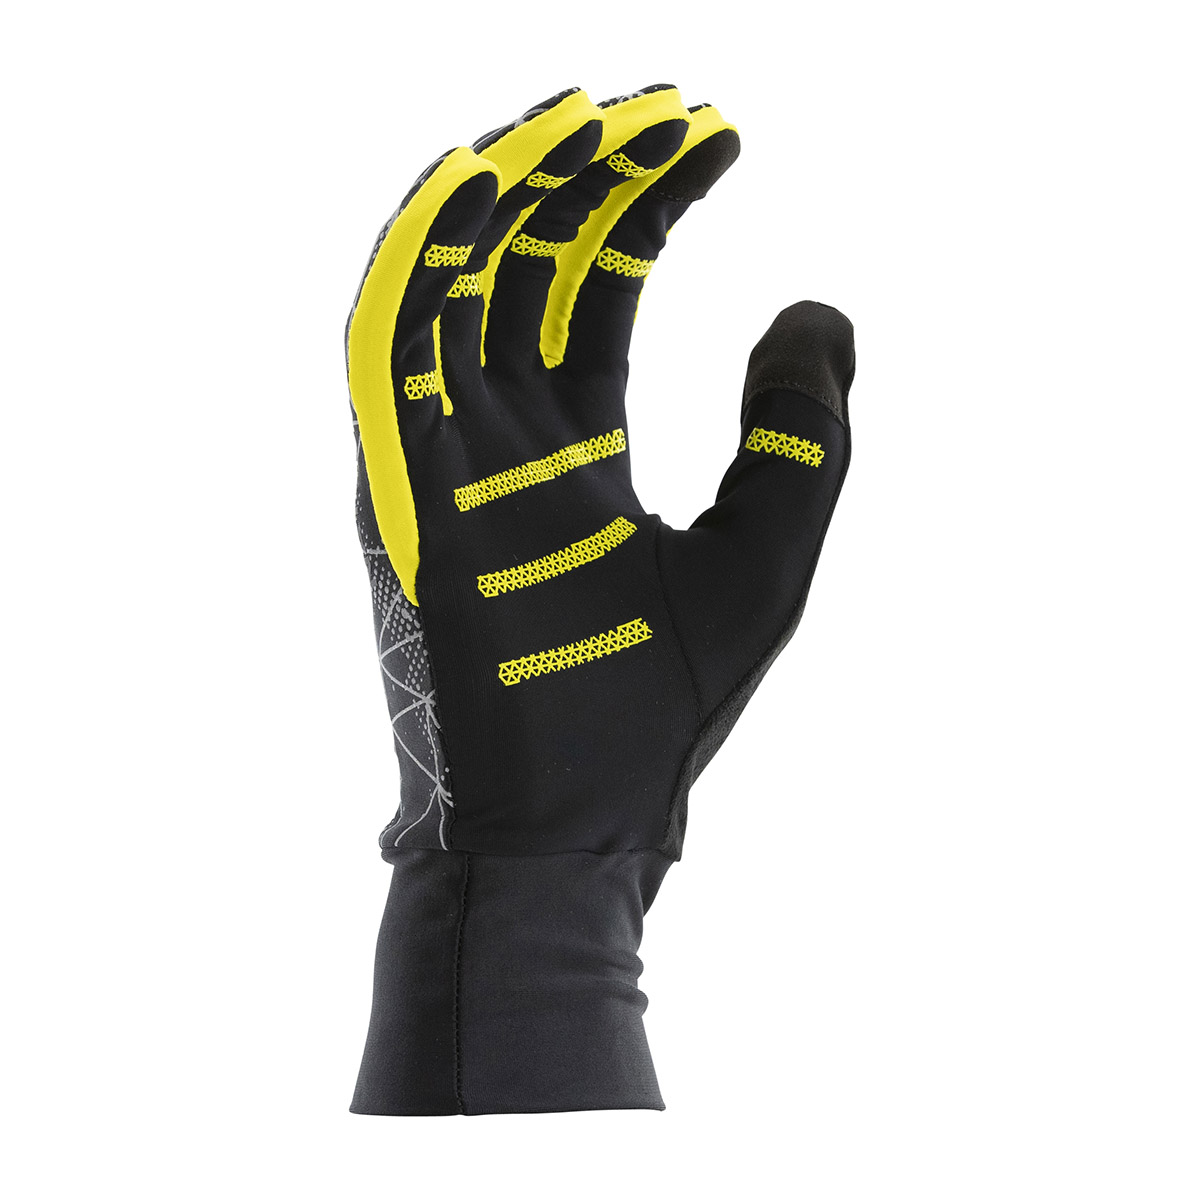 Nathan HyperNight Reflective Gloves, , large image number null